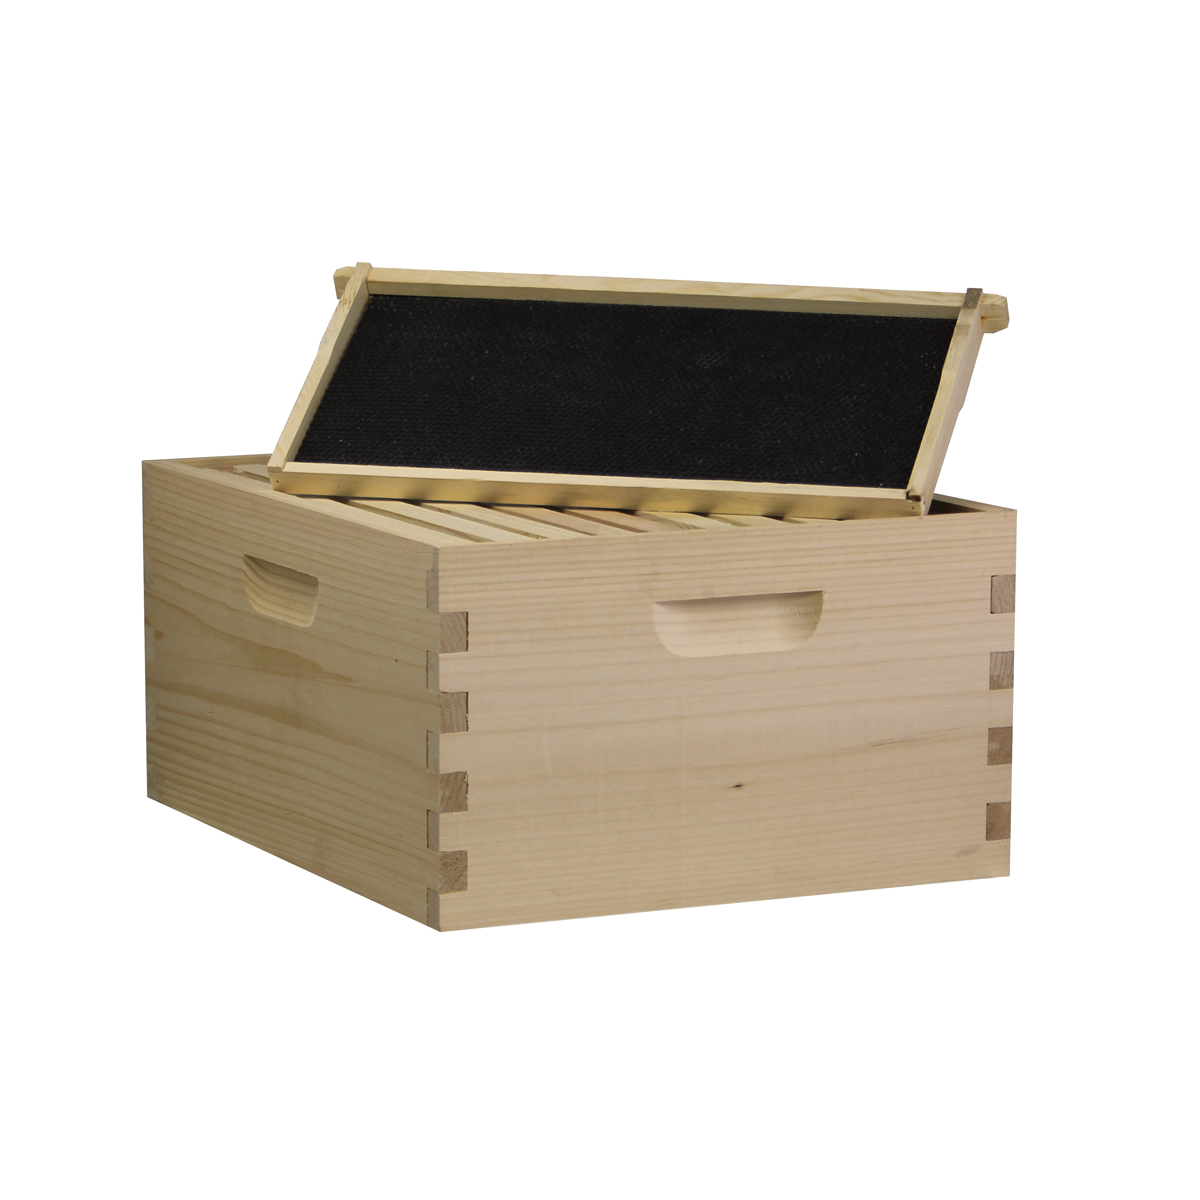 Busy Bees 'N' More Amish Made 10 Frame Deep Brood Box With Frames & Foundations